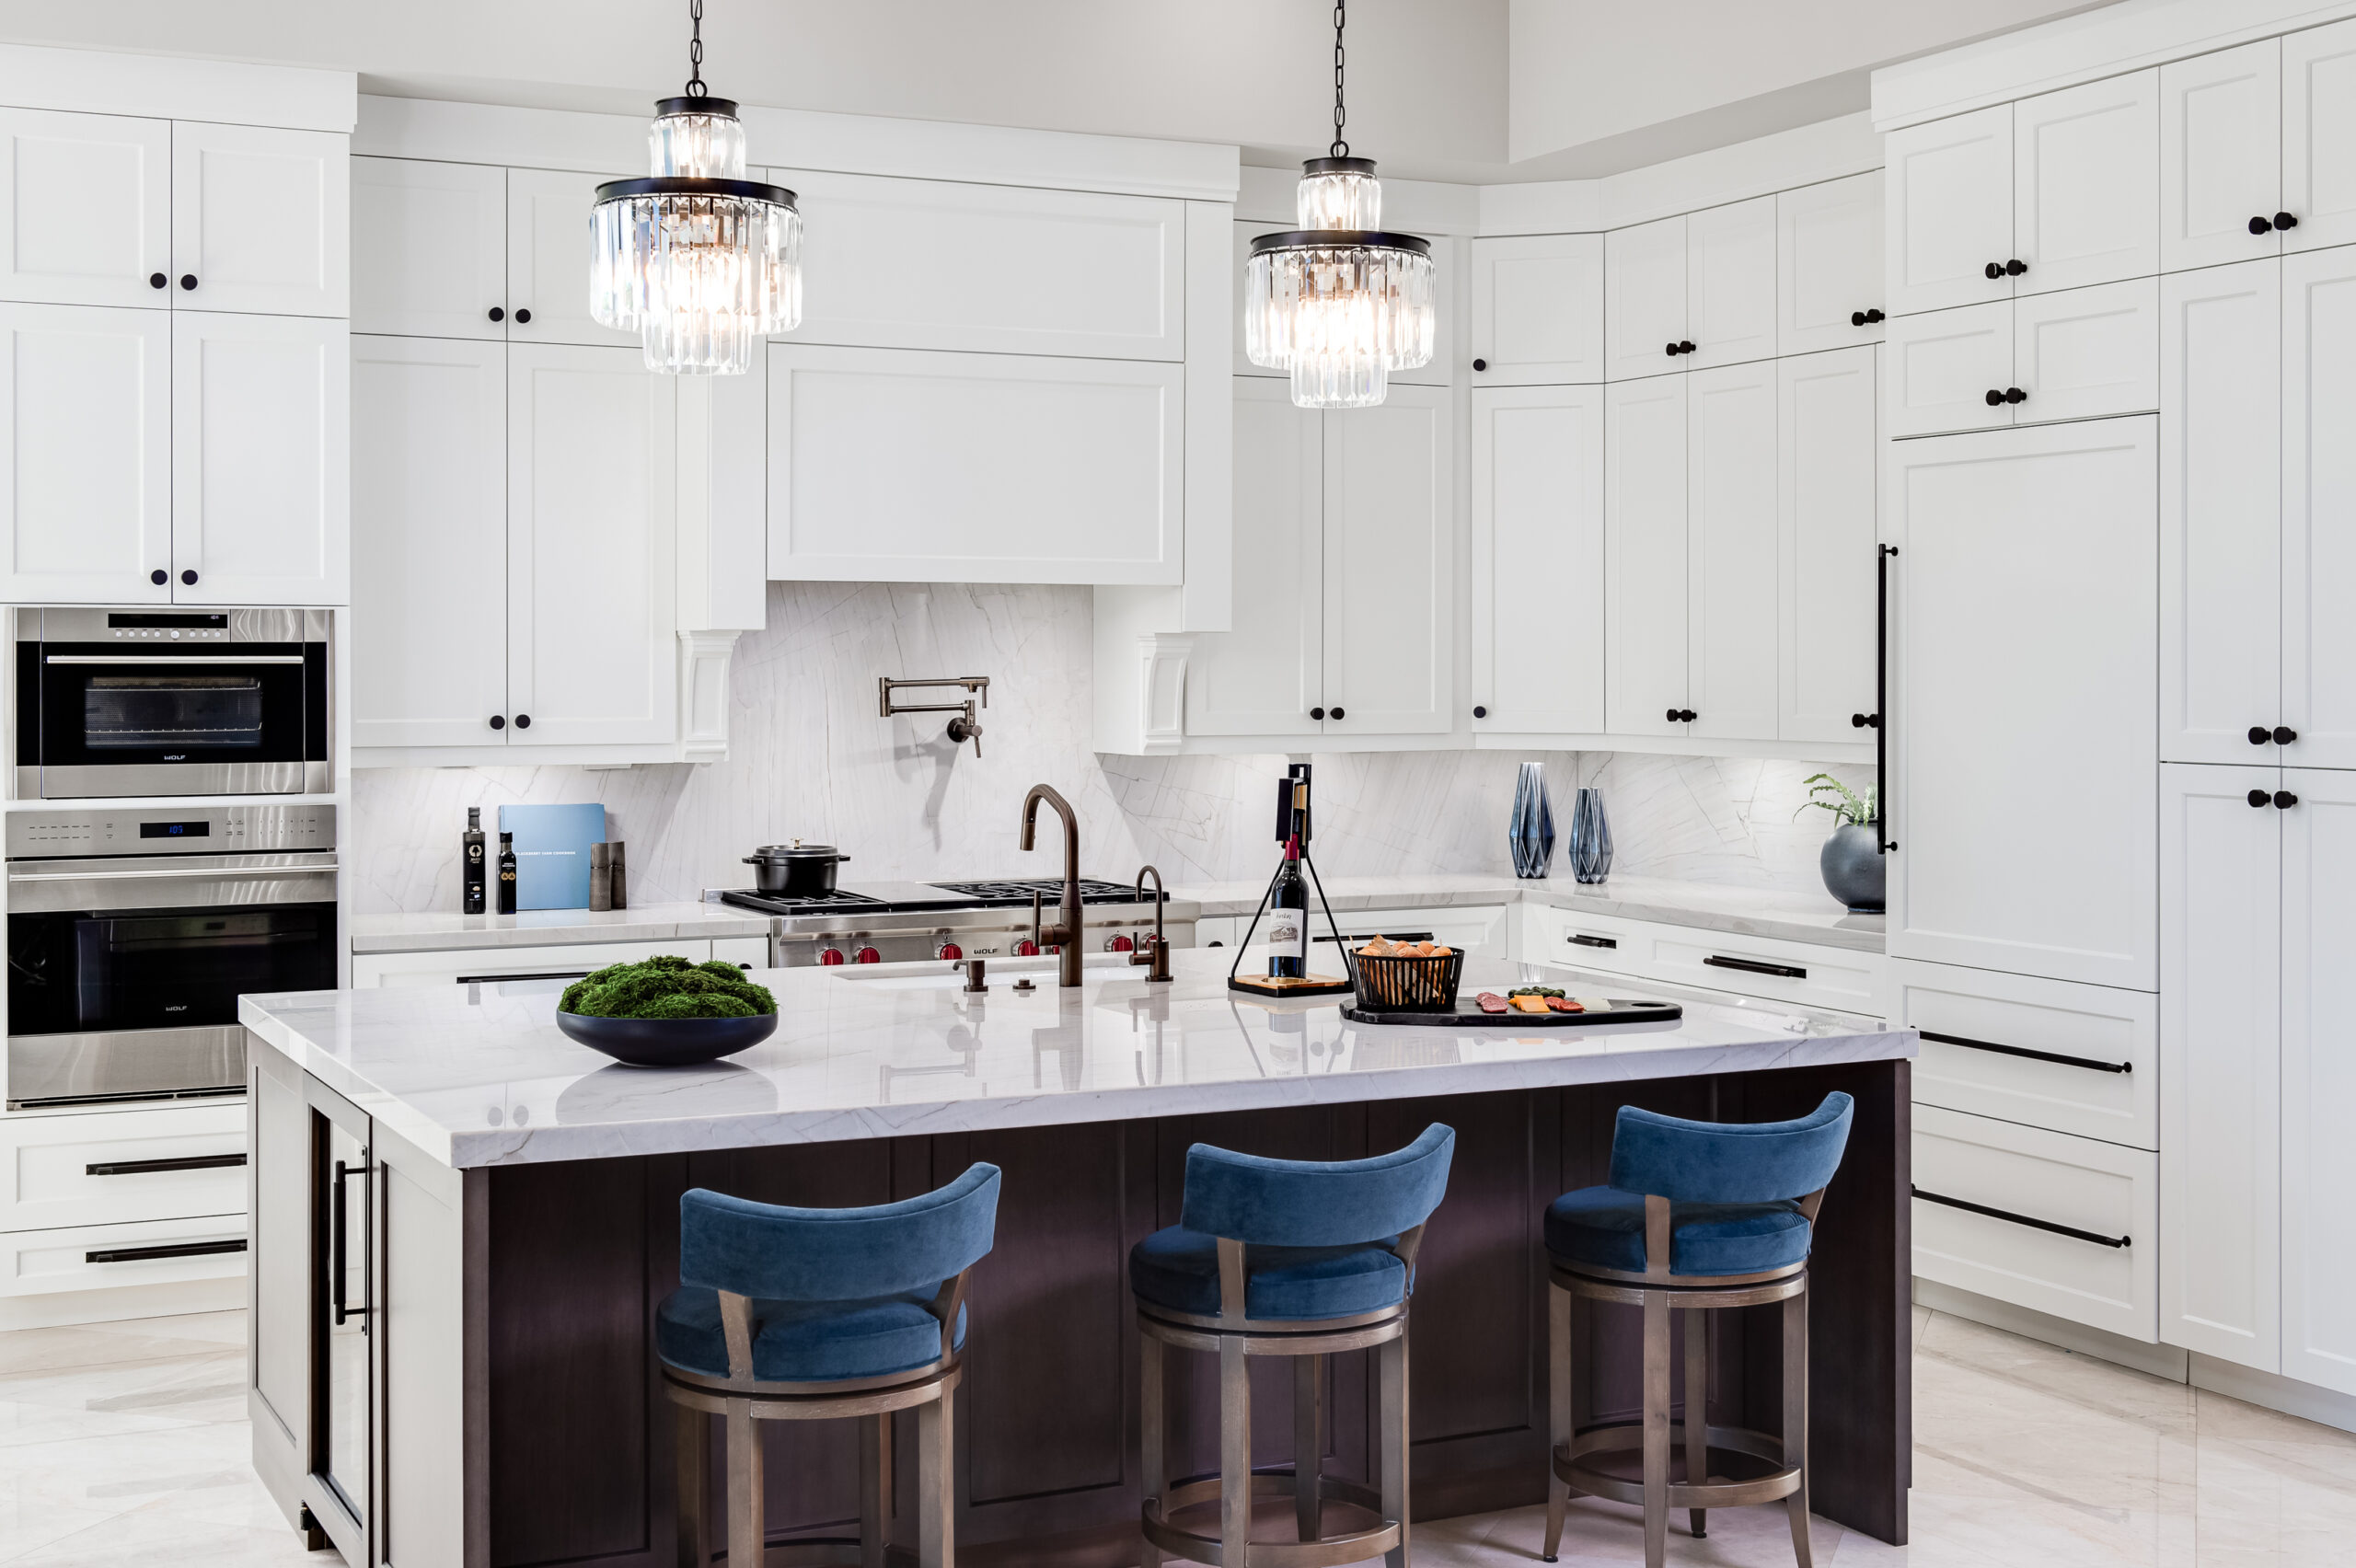 A white kitchen with blue barstools photographed by professional interior design photographer